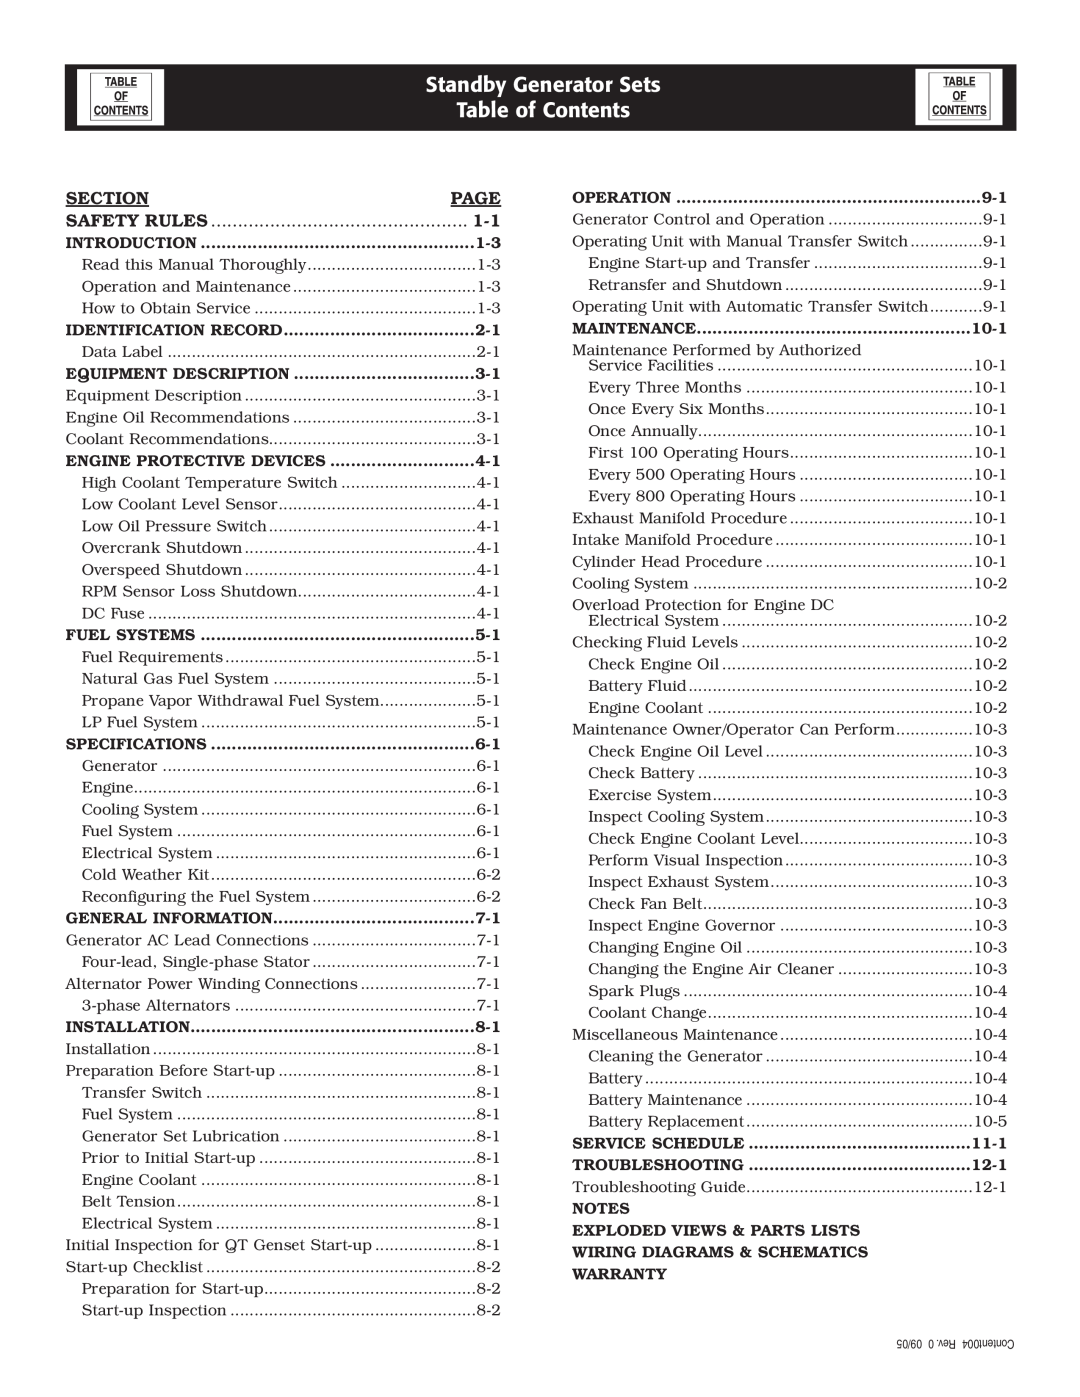 Elite 005212-0 owner manual Standby Generator Sets Table of Contents, Section, Page, Safety Rules 